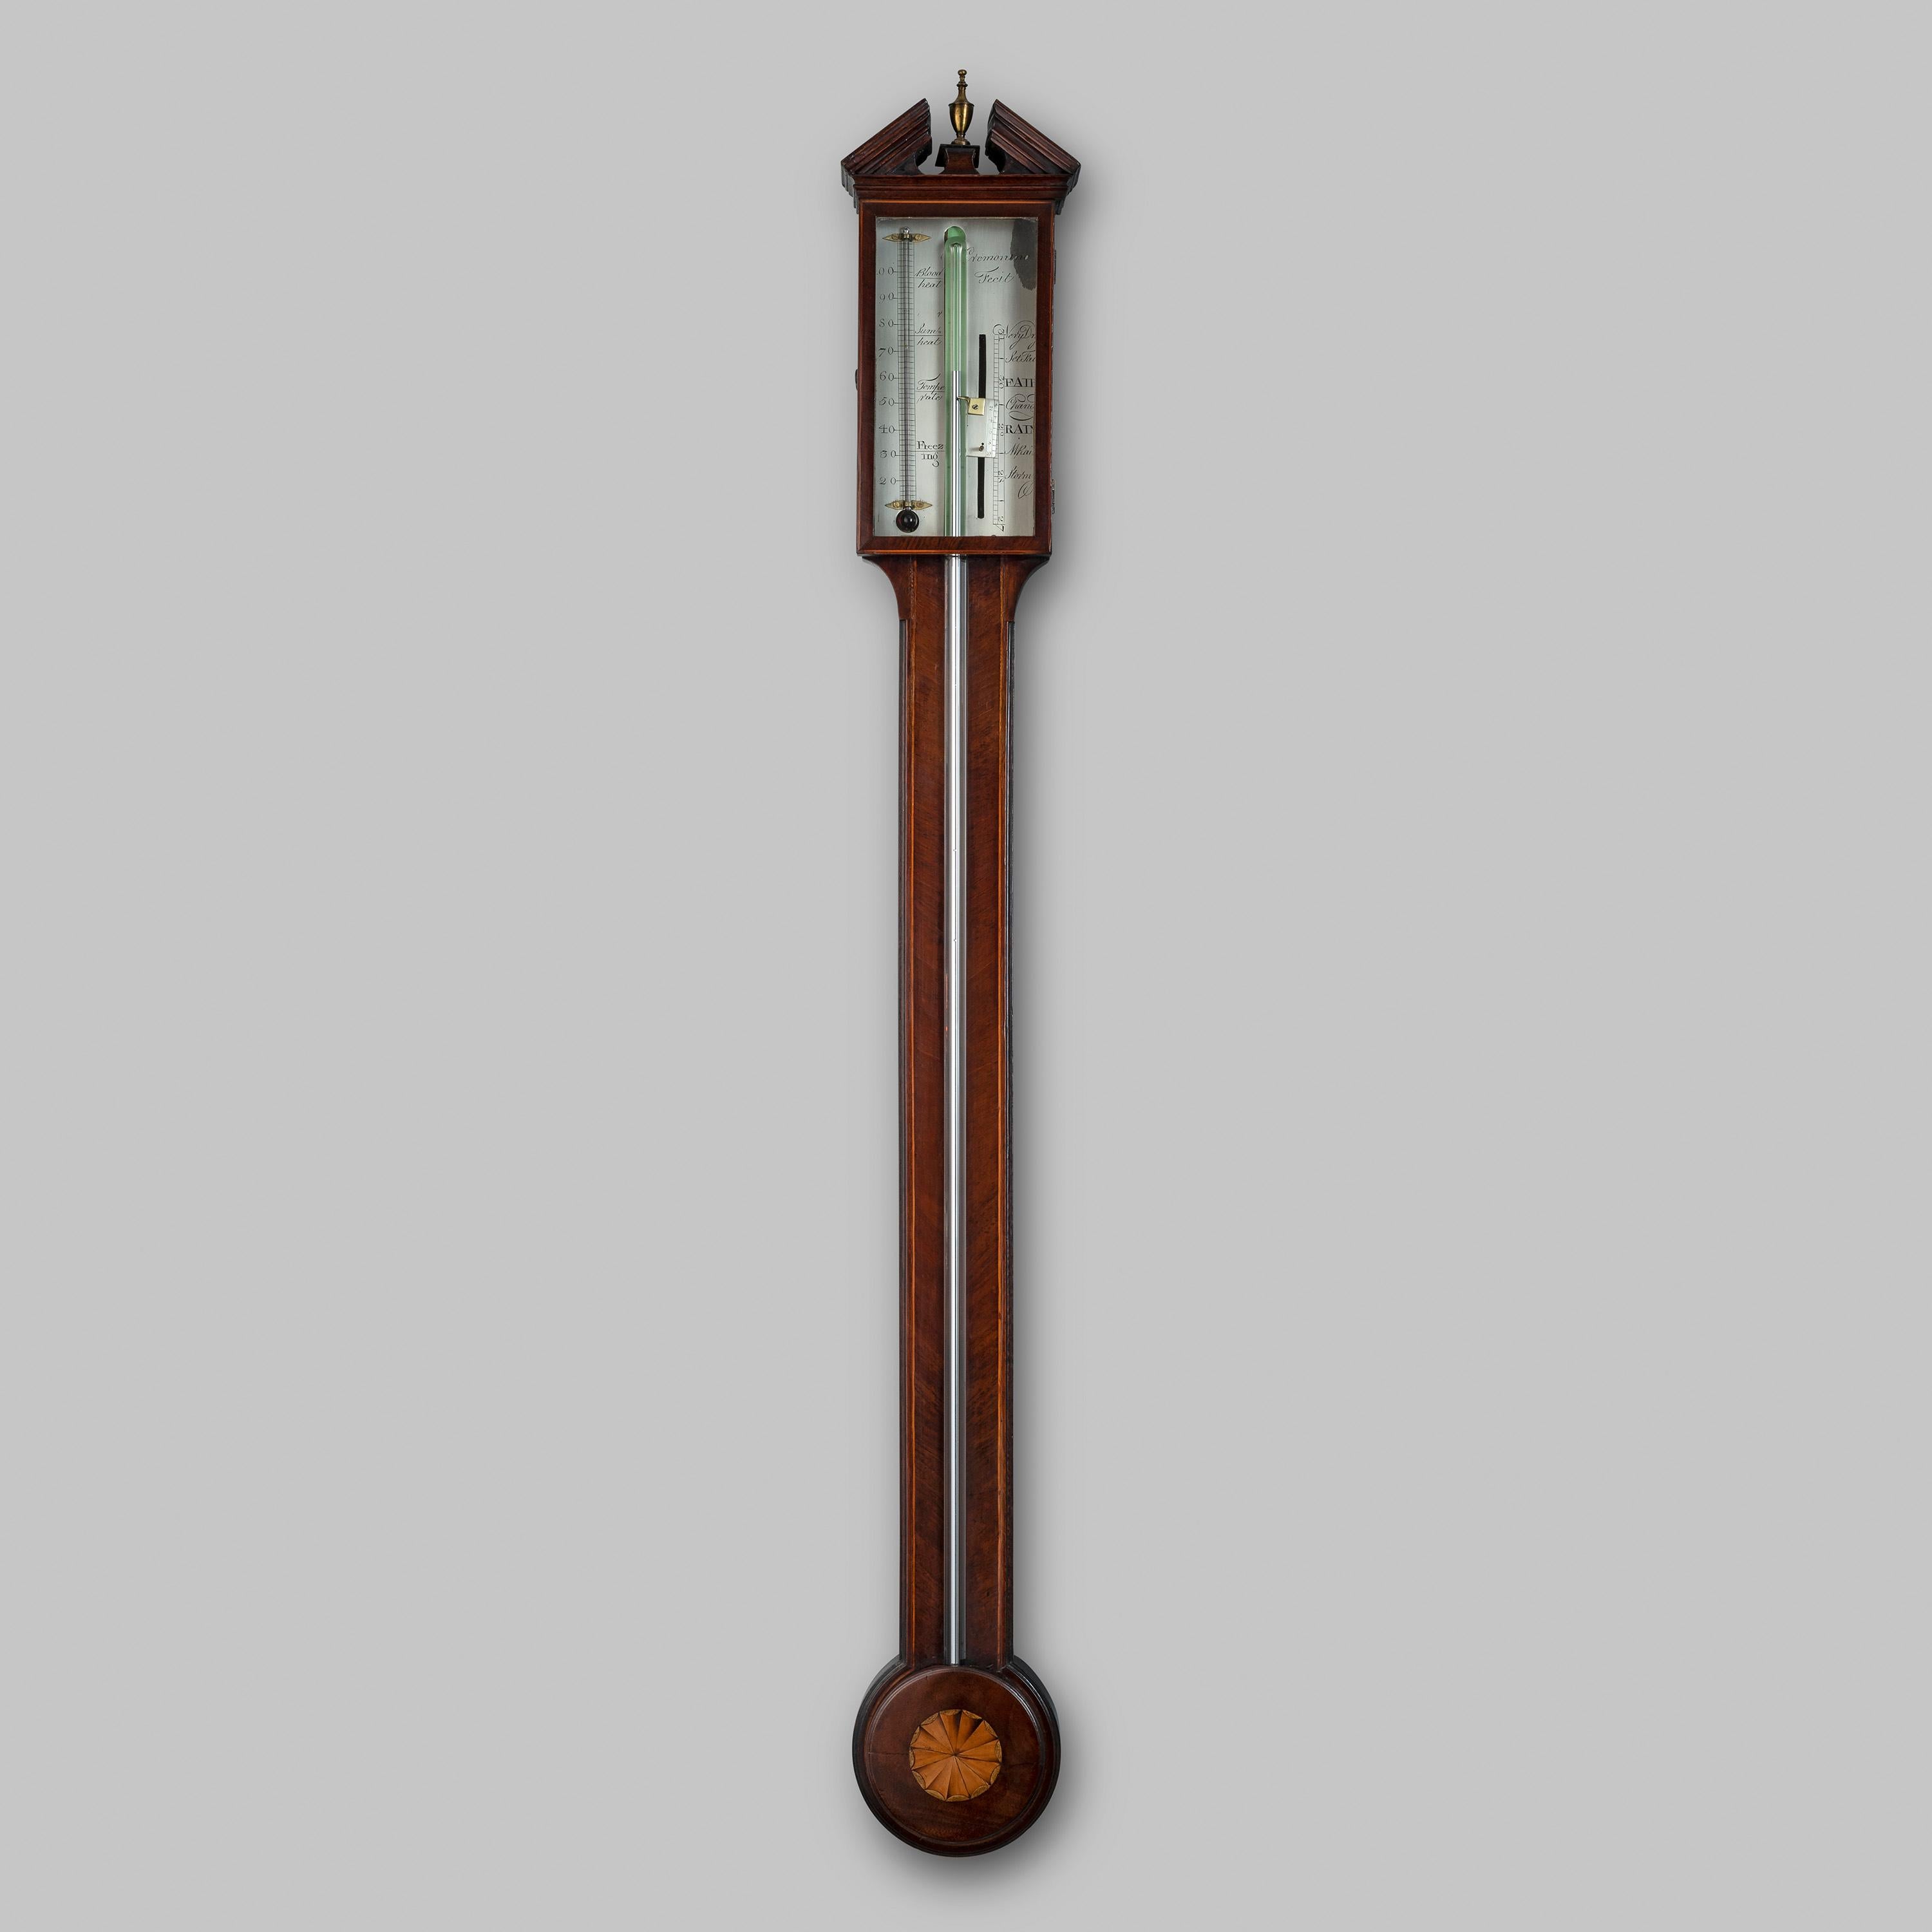 A fine and well-proportioned early 19th century figured mahogany barometer signed ‘Cremonino, Fecit.’ 

This barometer has a broken arch pediment above a flush-glass door, enclosing an engraved silvered register plate and thermometer. 

The mahogany